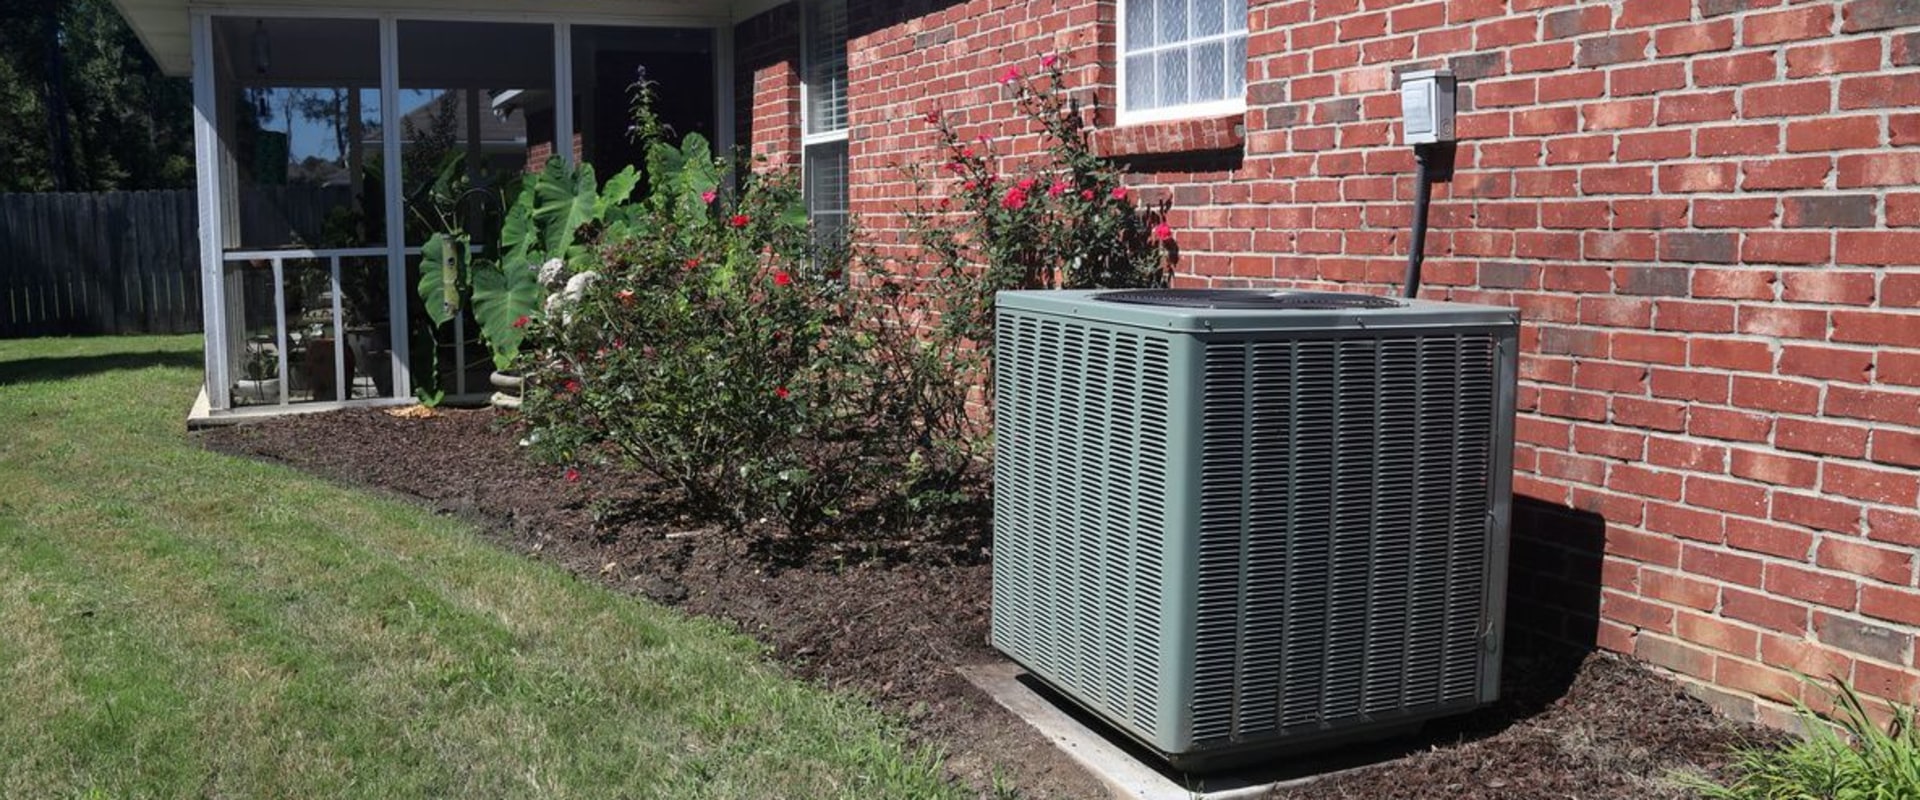 How Long Can an HVAC System Last in Florida?